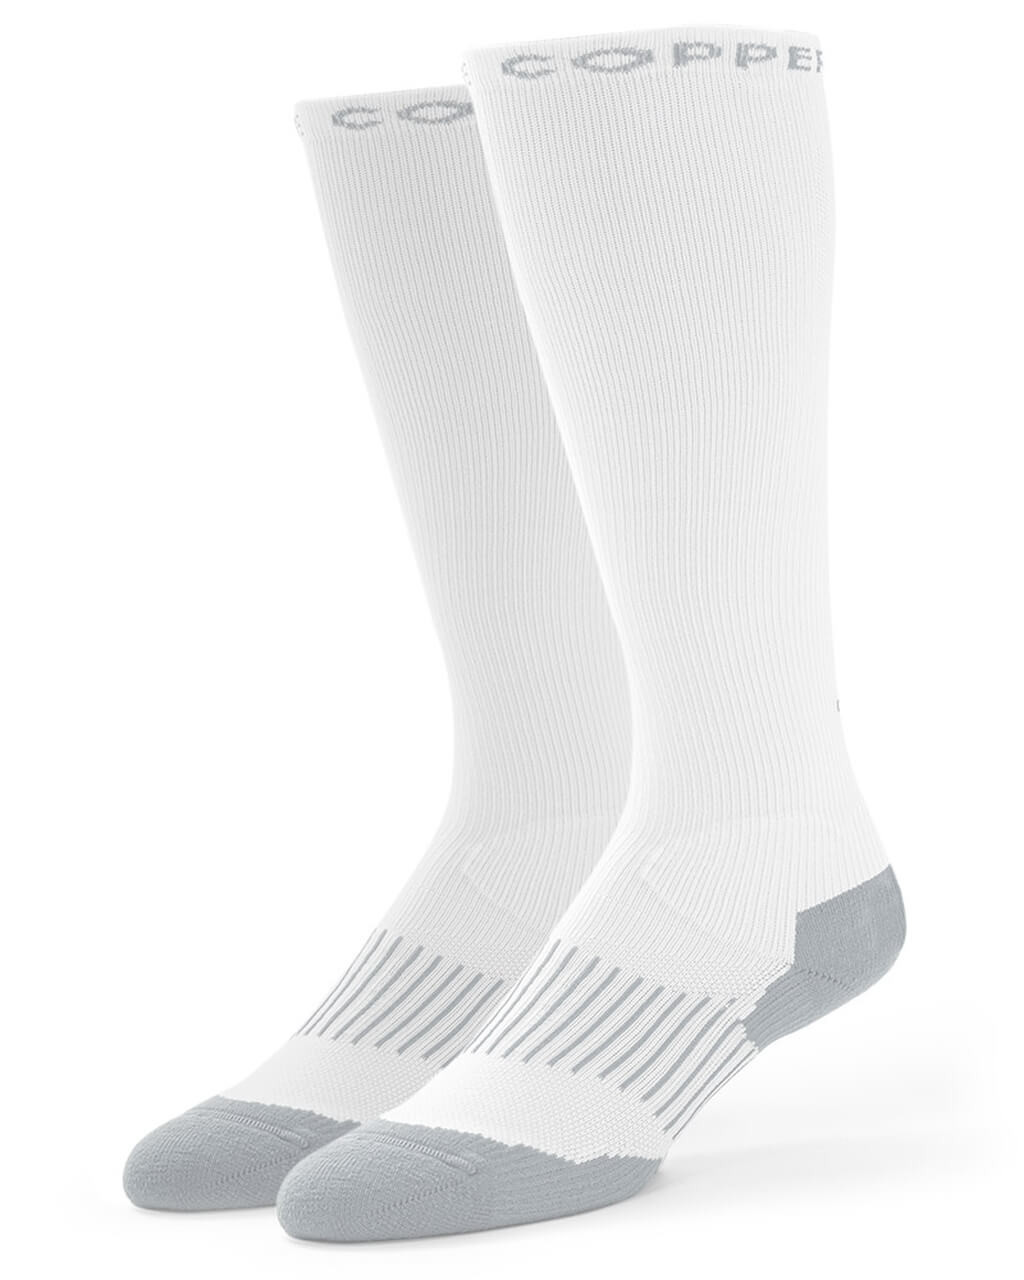 Review: FITLEGS Compression Socks 